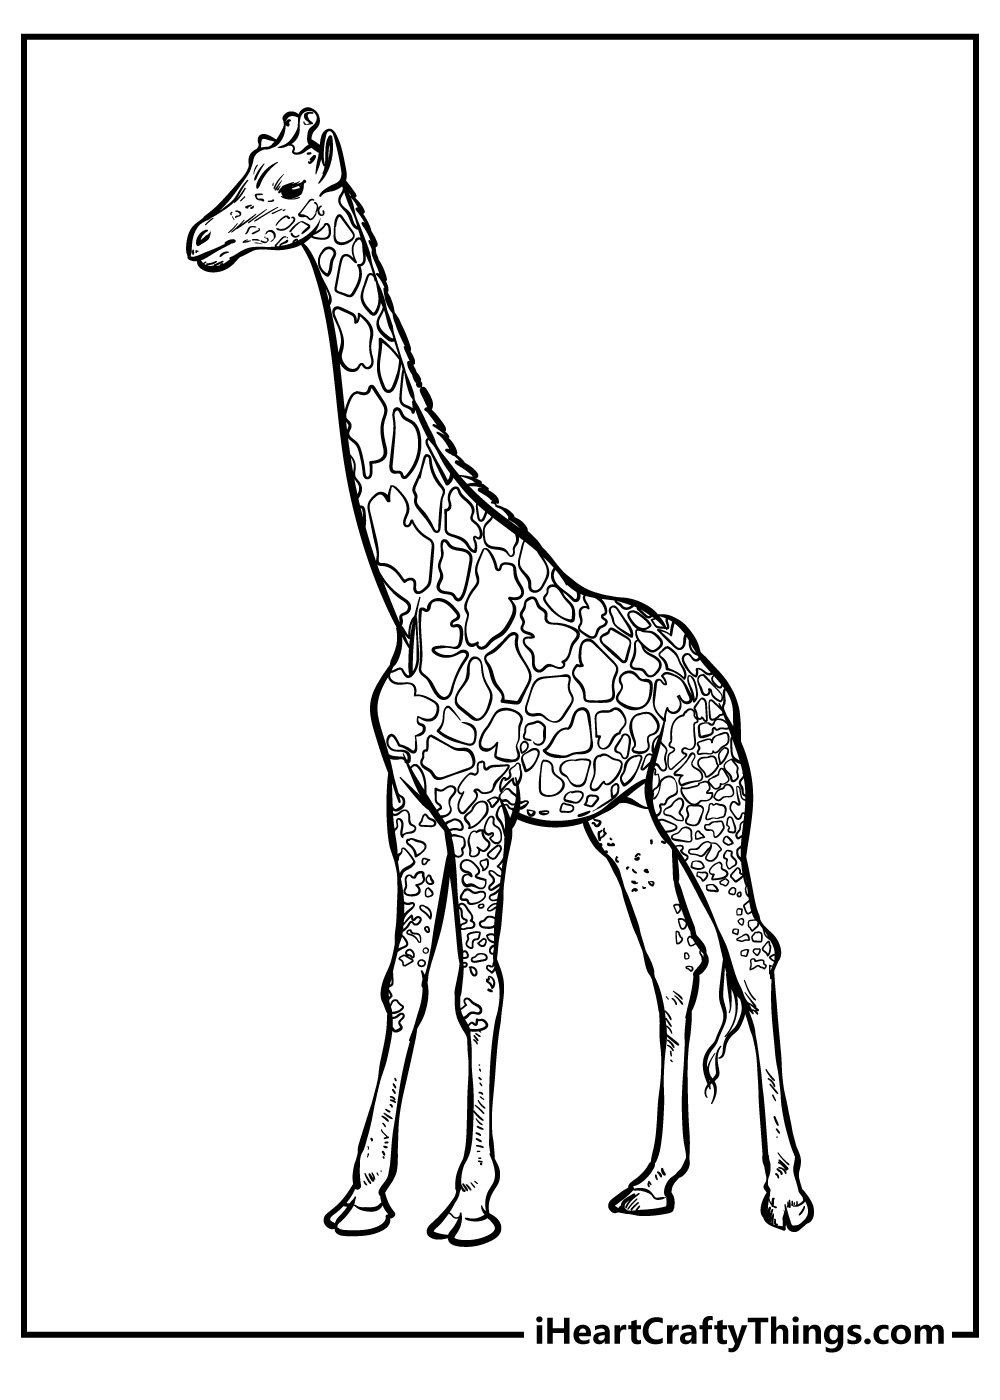 Printable Zoo Animals Coloring Pages Updated 21